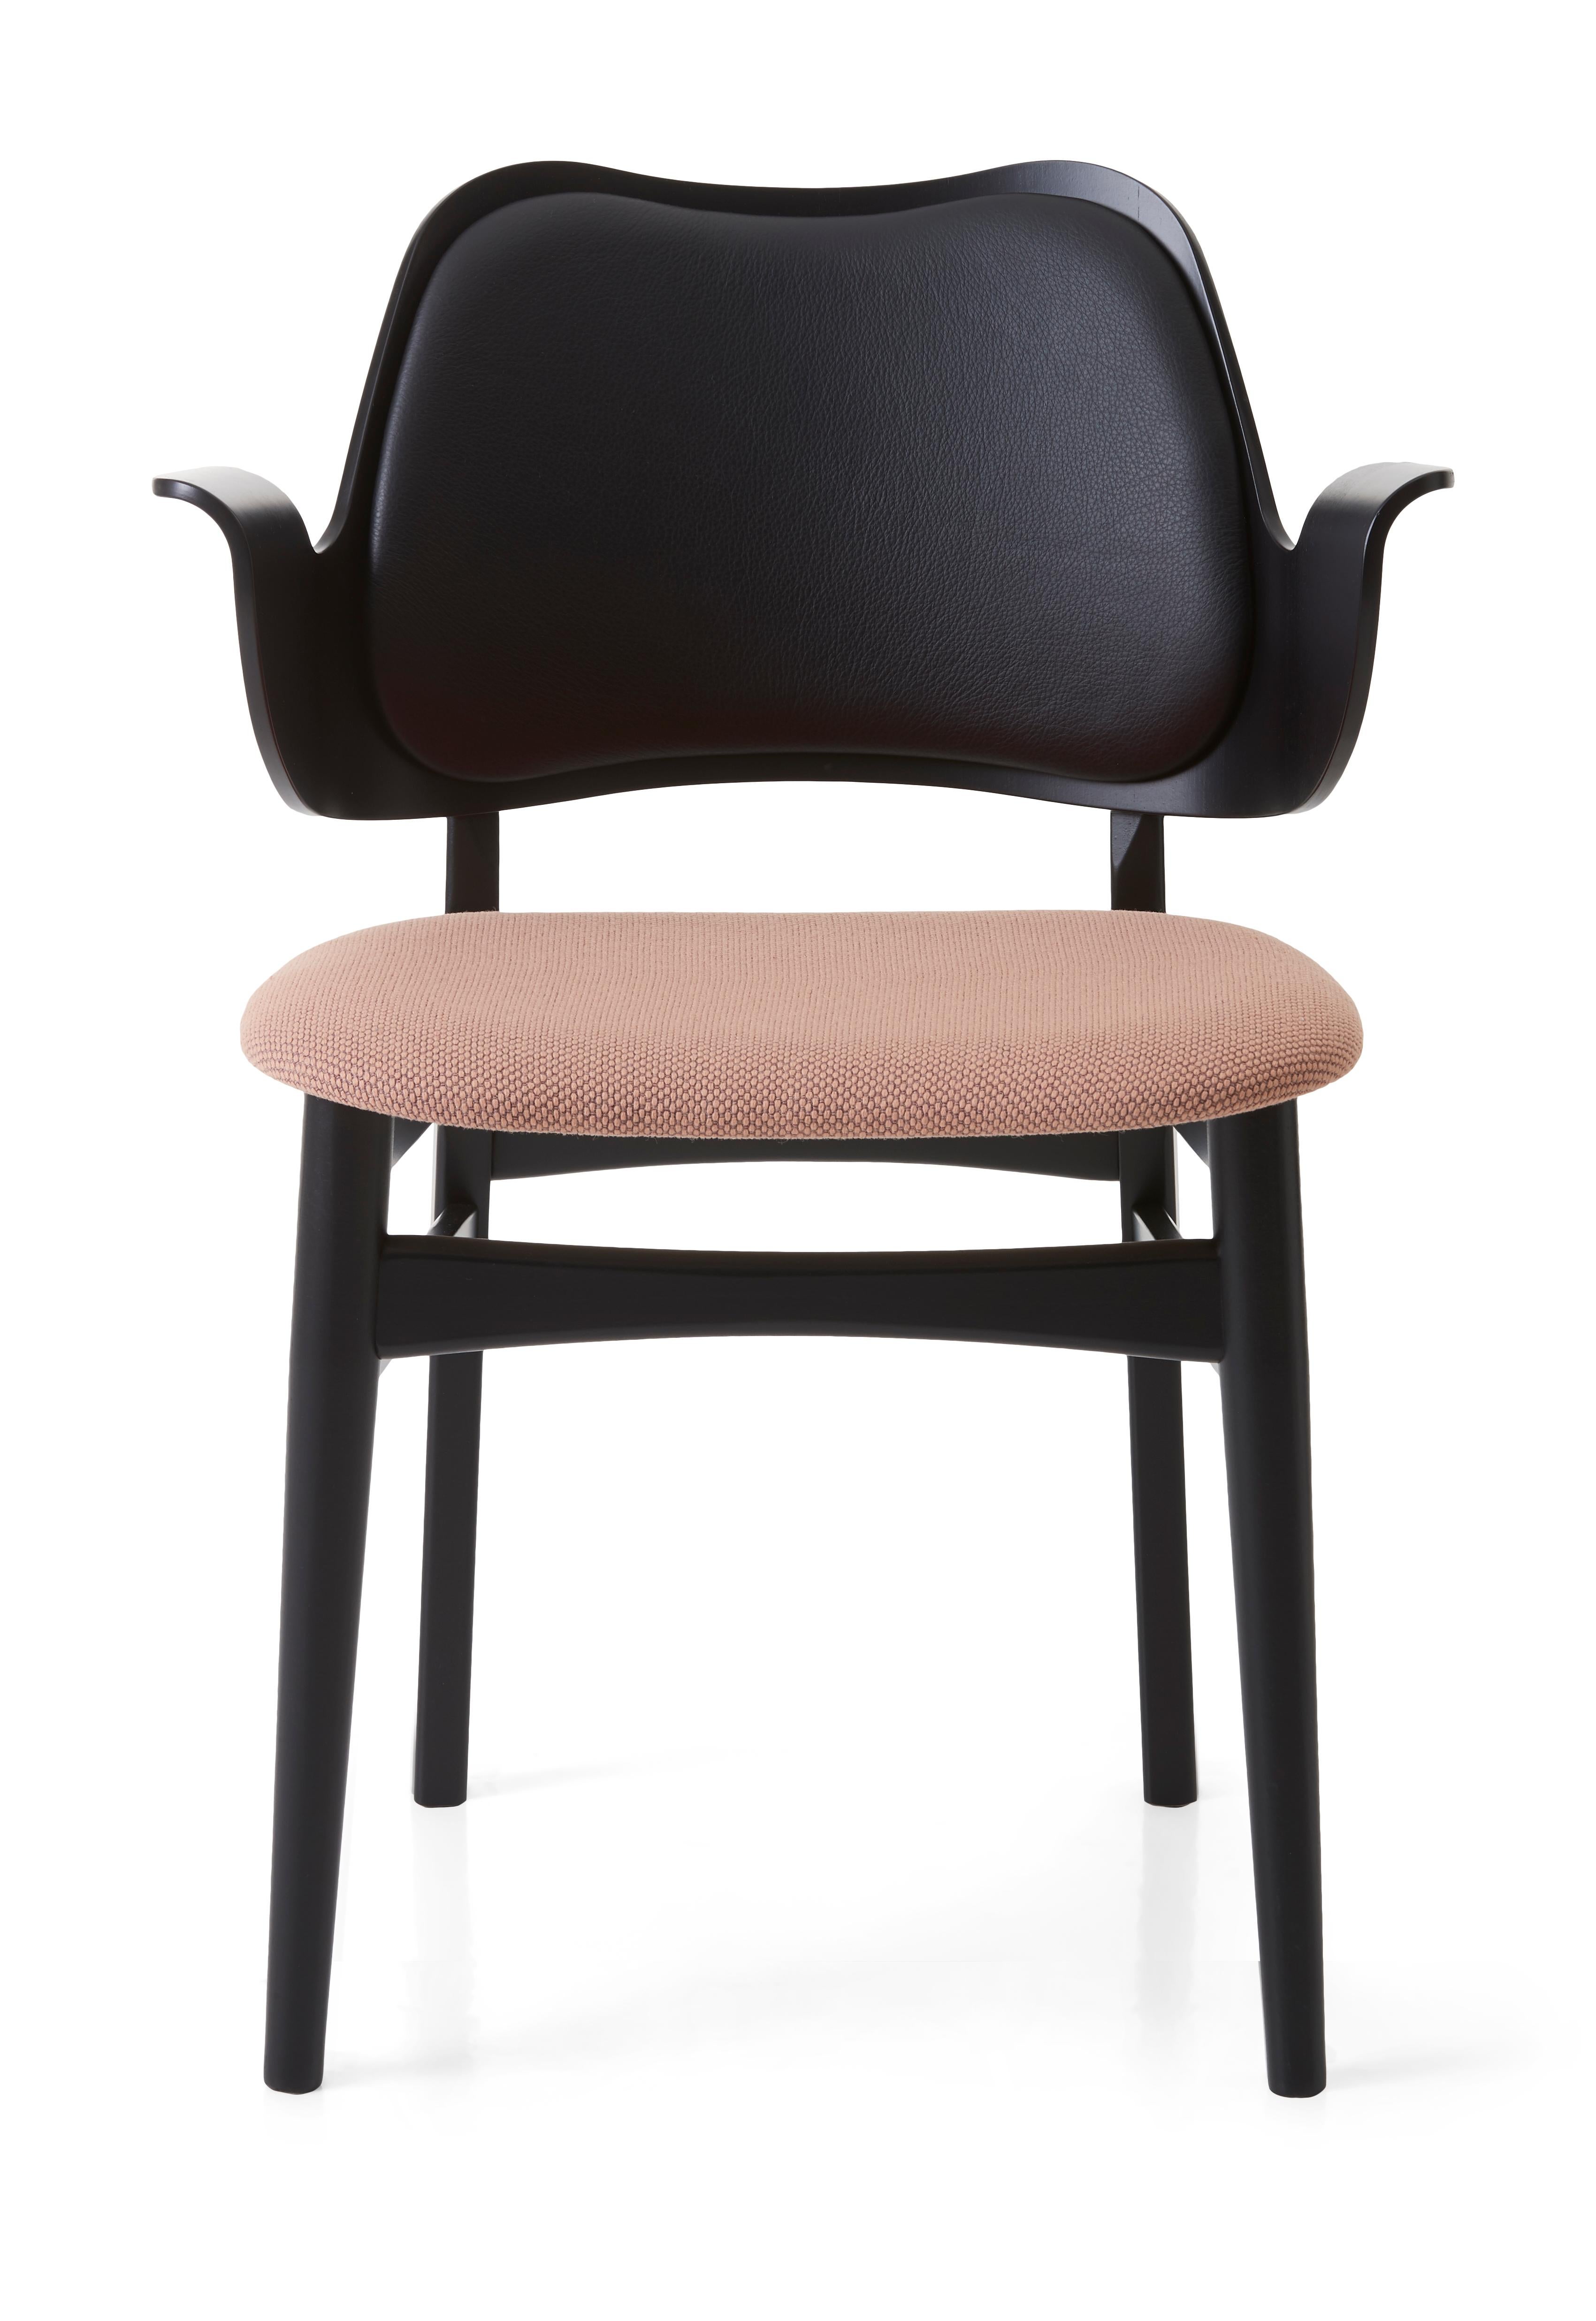 Gesture chair black beech fresh peach black leather by Warm Nordic
Dimensions: D56 x W53 x H 80 cm
Material: Teak or white oiled solid oak, Black lacquered solid beech, Veneer seat and back, textile and leather upholstery
Weight: 7.5 kg
Also